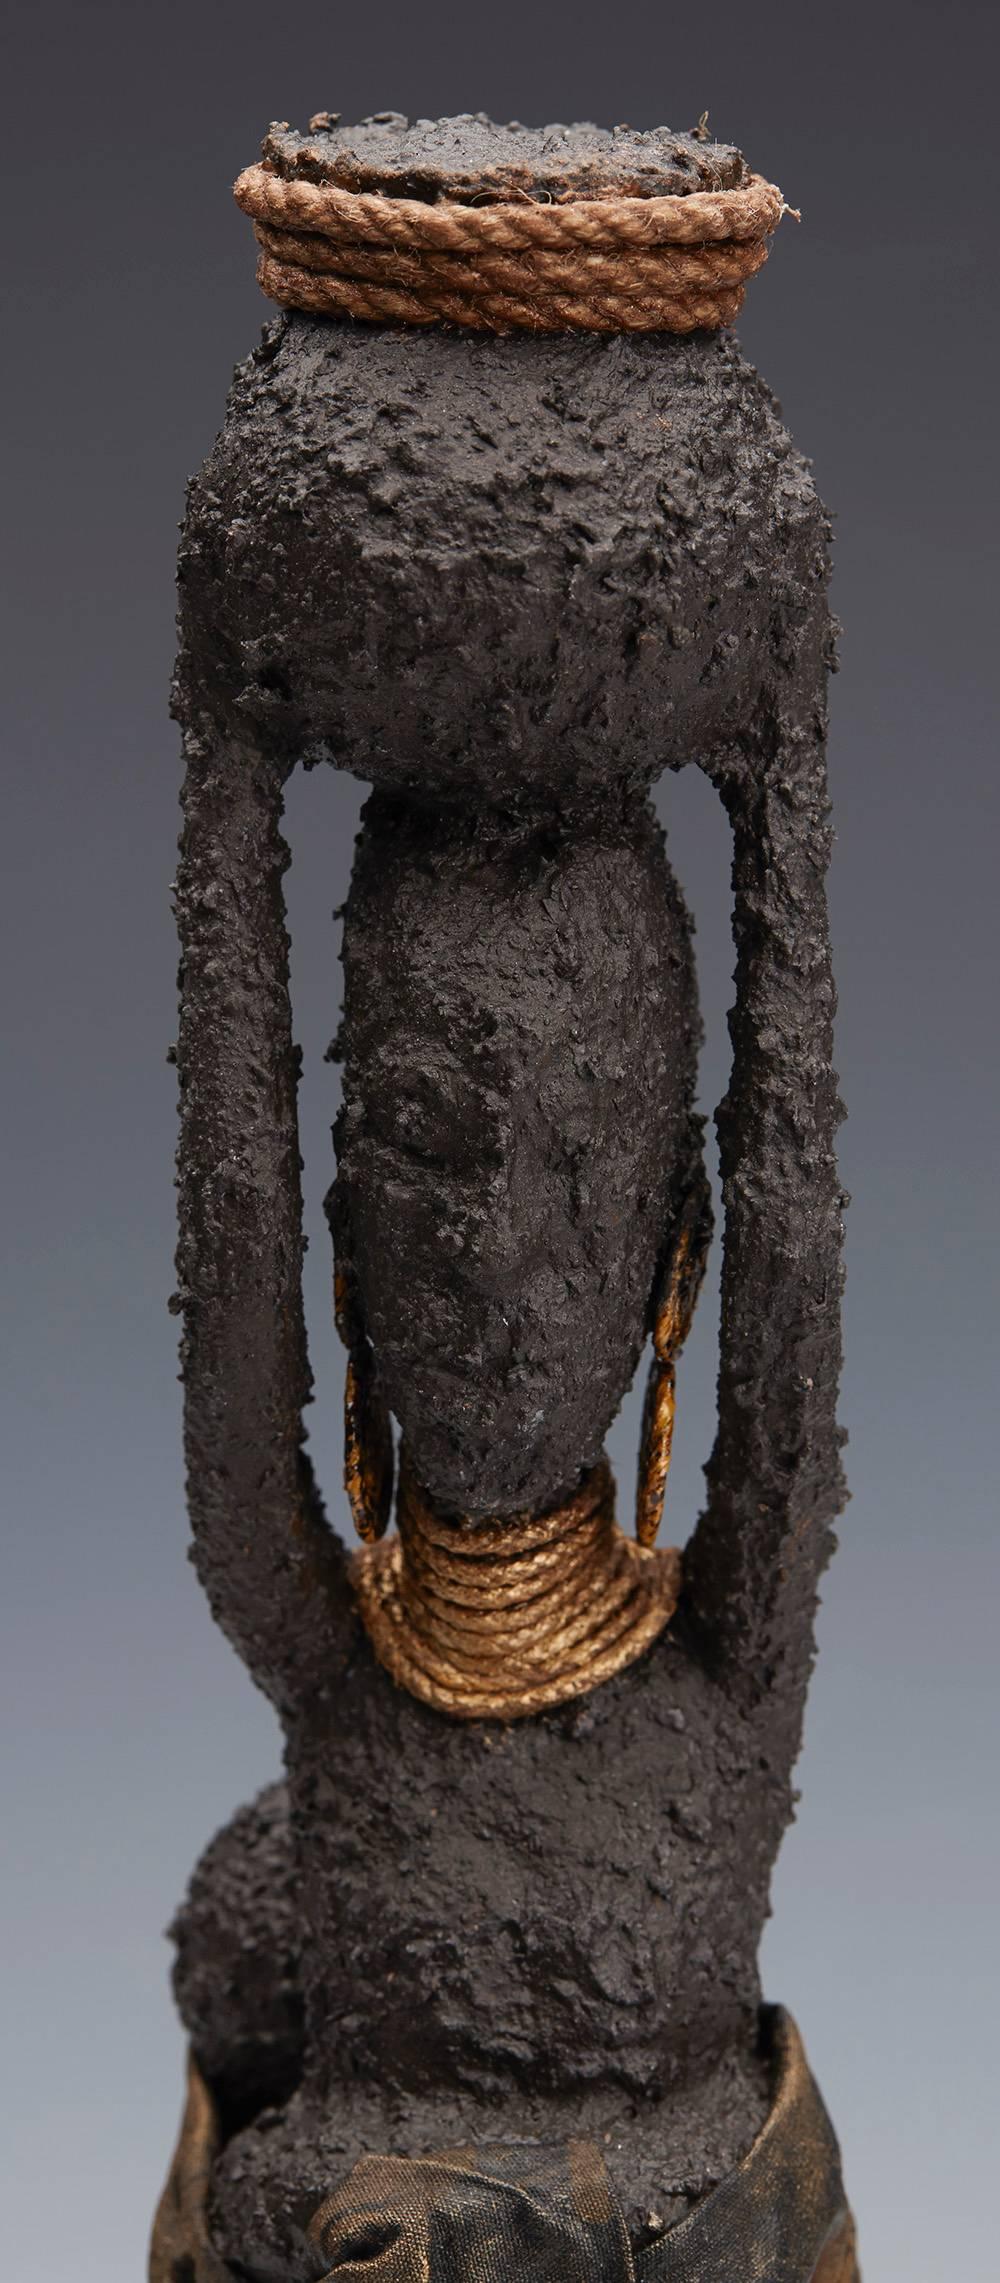 We are proud to offer a unique sculpture from Hertfordshire based artist Annie Marsters, entitled Impilo Entsha. Annie has a distinct approach to sculpting figures, using traditionally made African objects and unique materials to craft meaningful